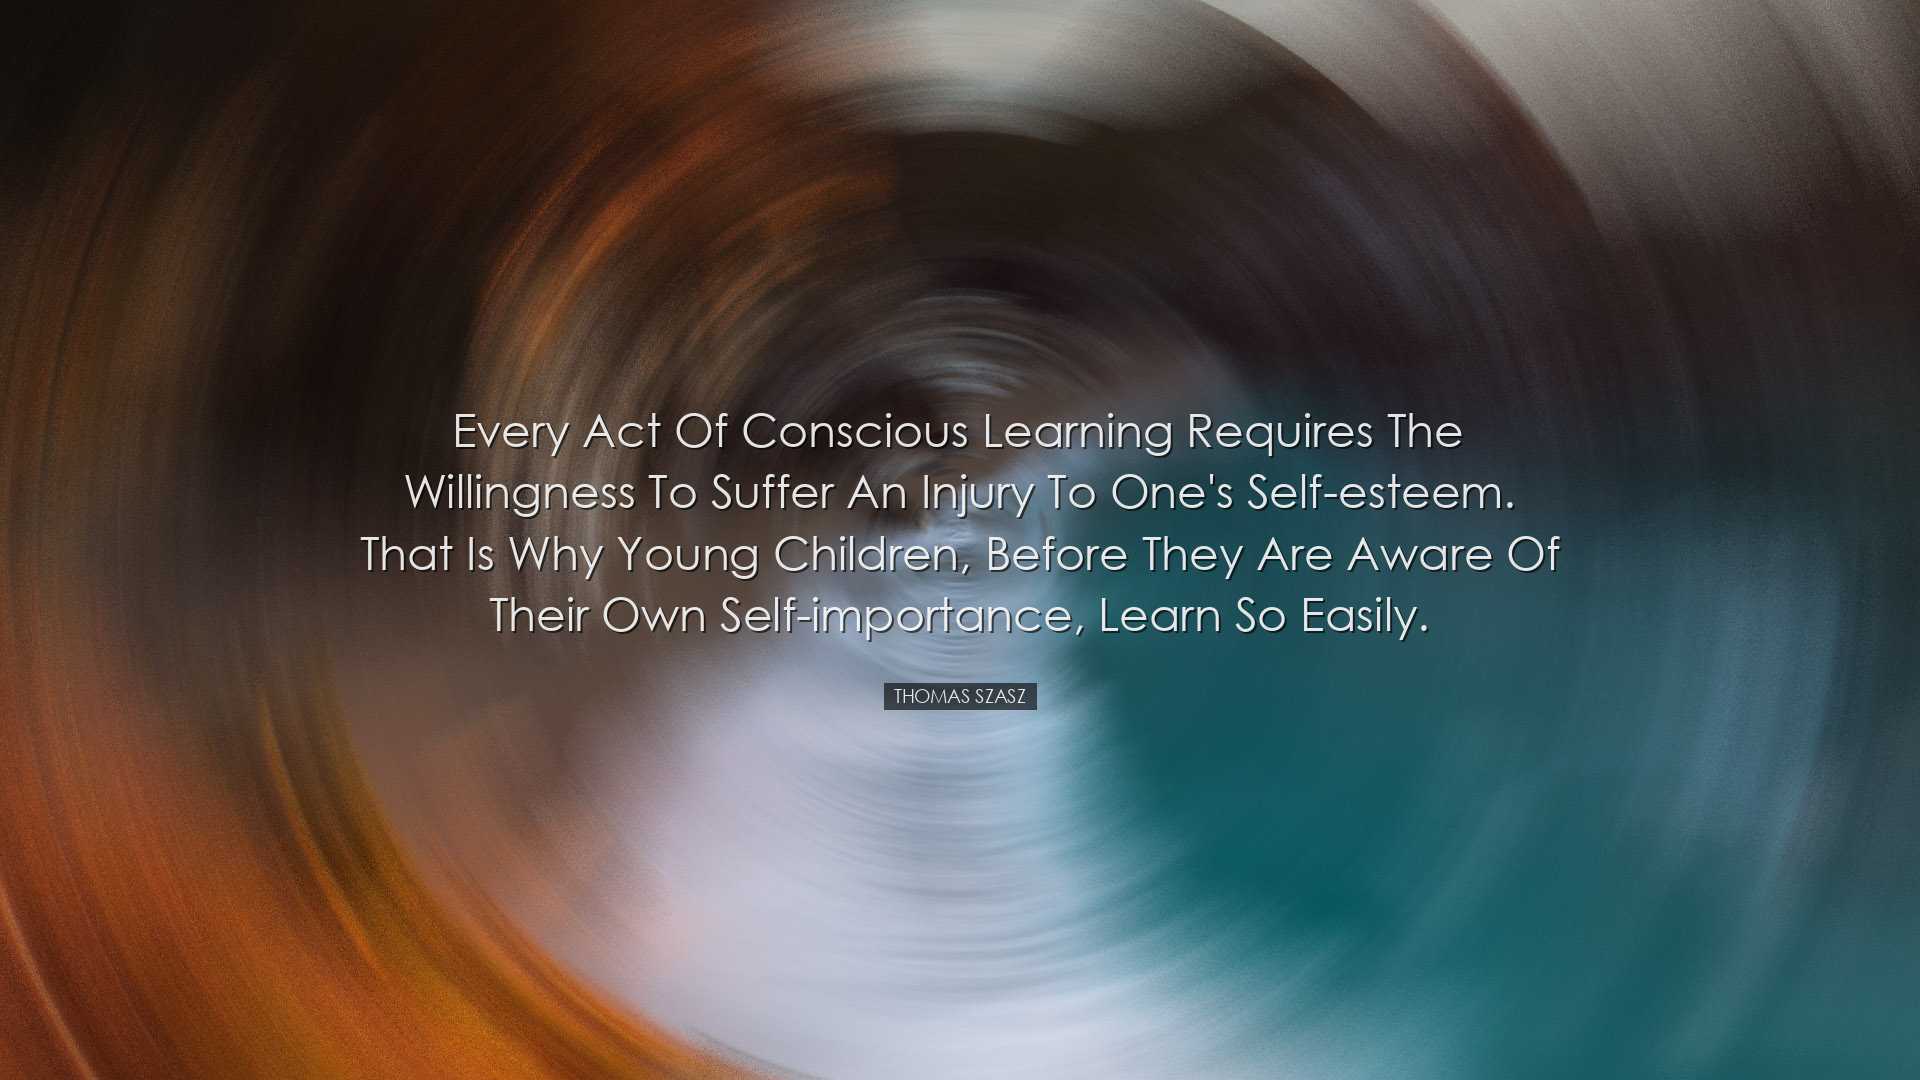 Every act of conscious learning requires the willingness to suffer